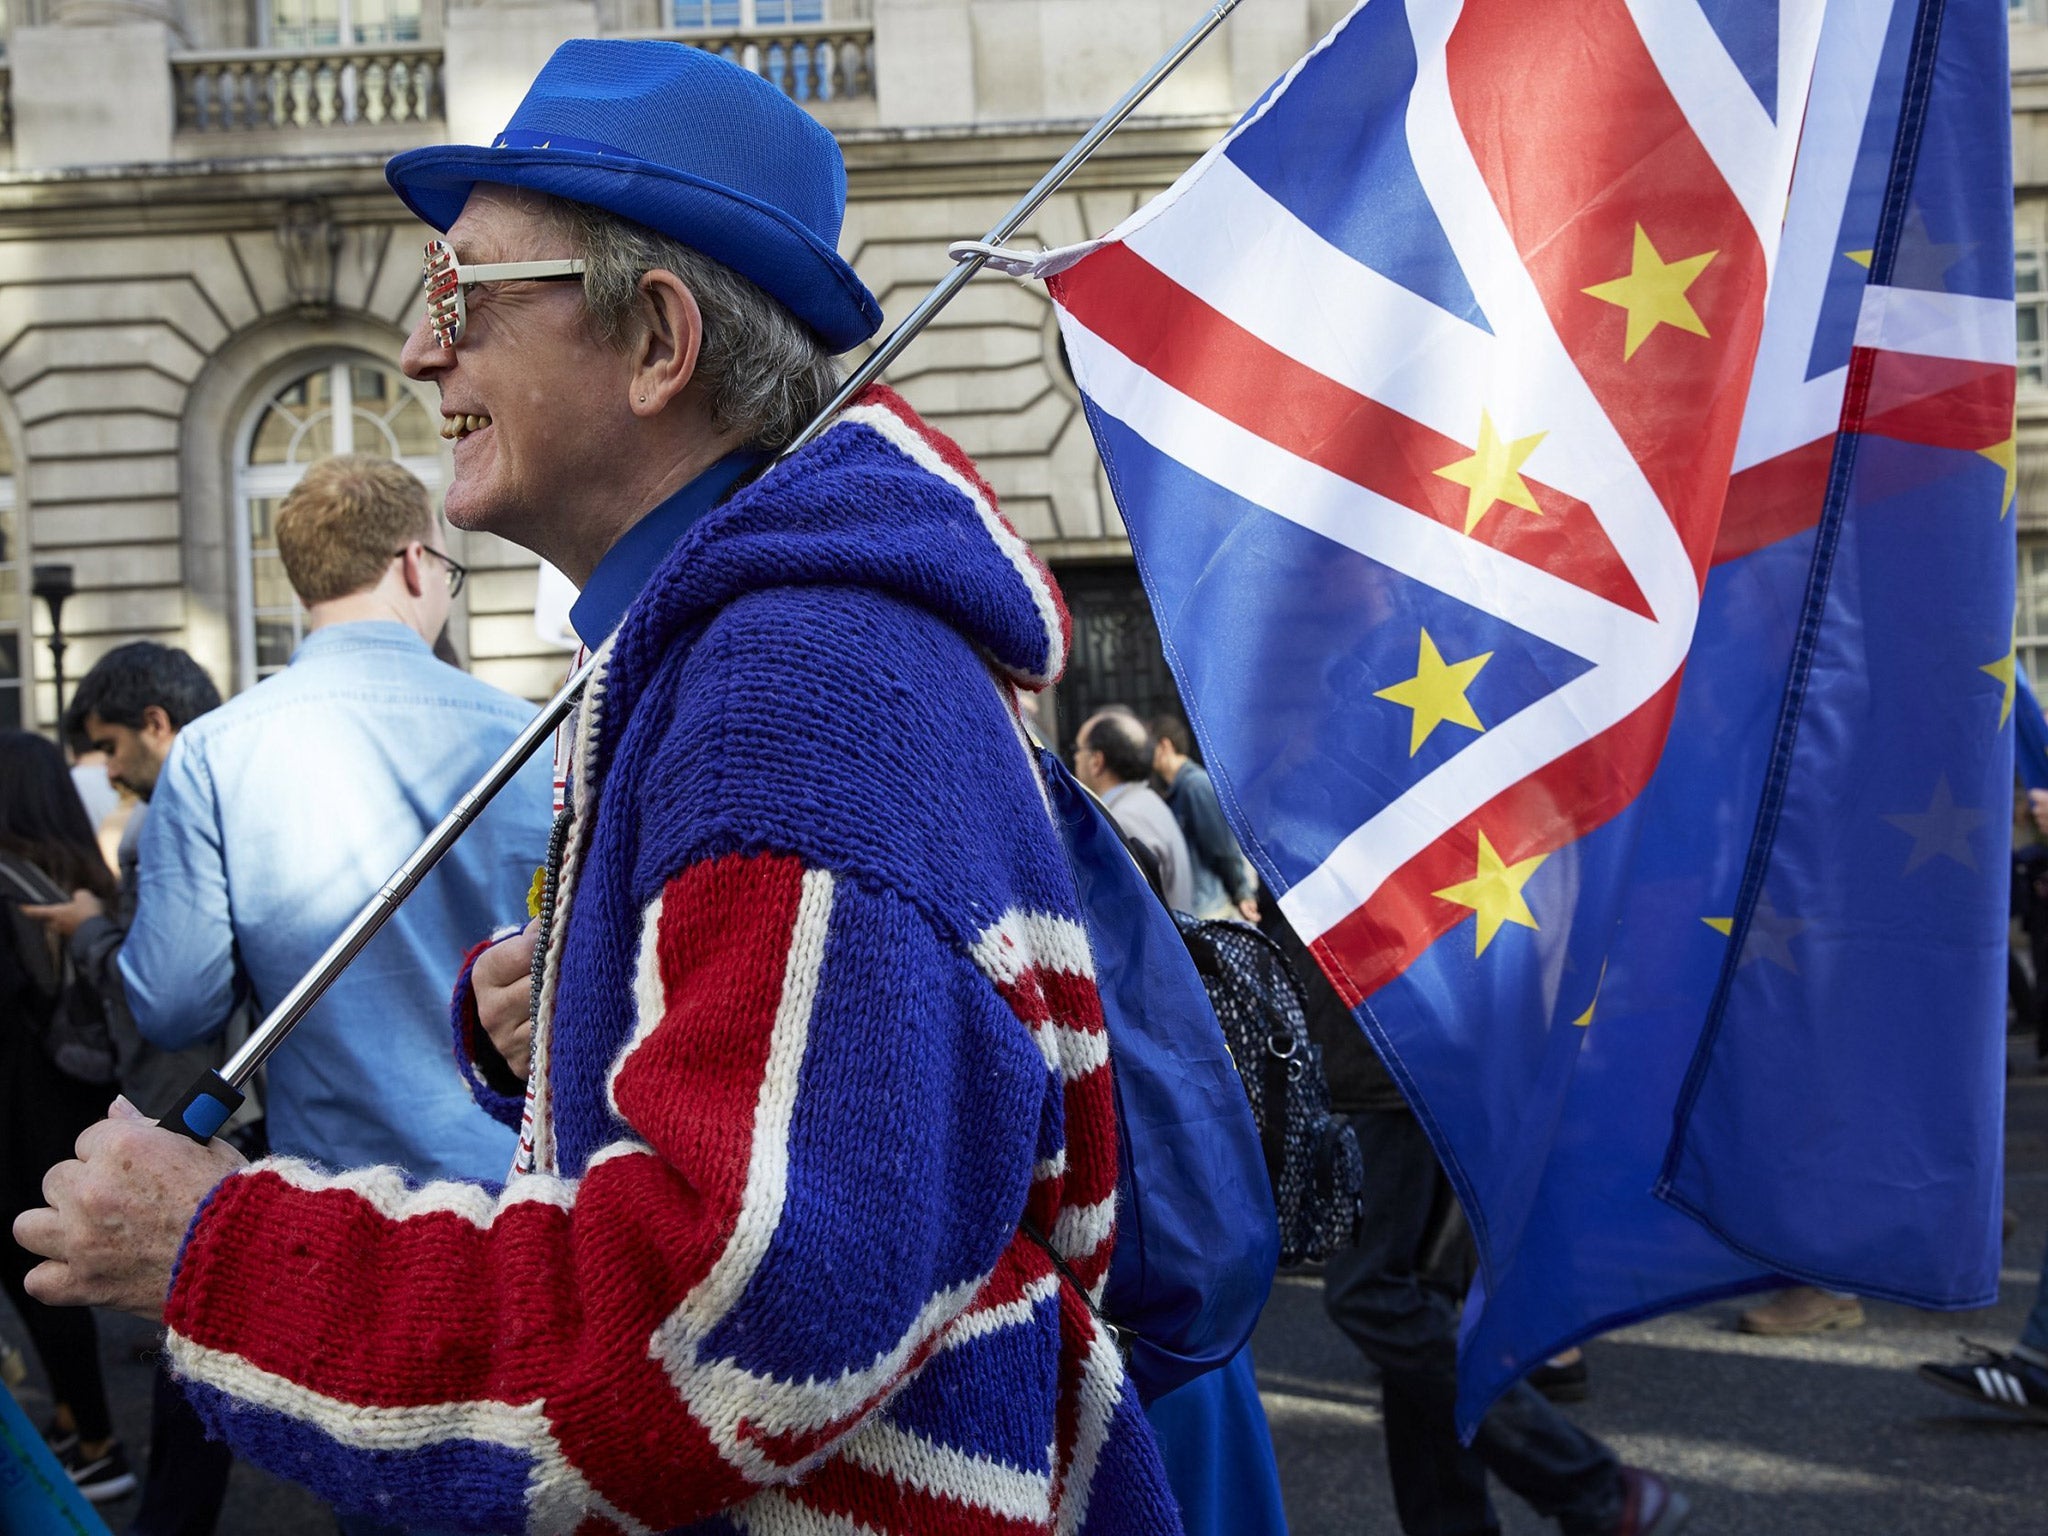 Over 700,000 people marched for a final say on the Brexit deal